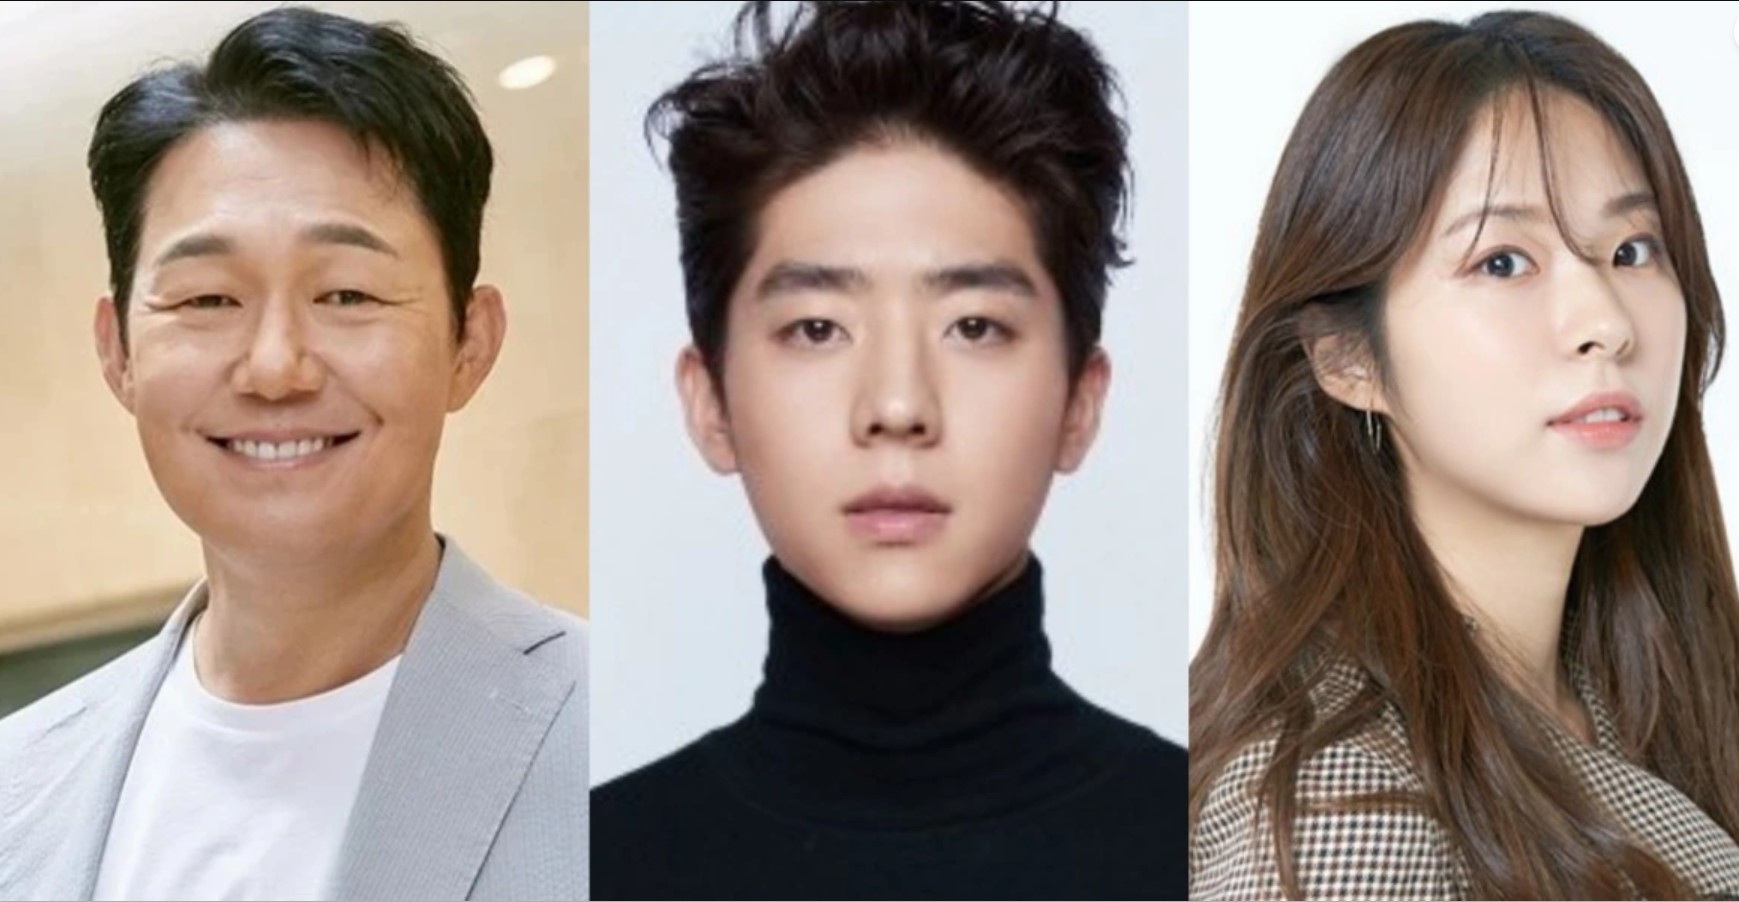 "Unlock My Boss" is a Korean drama series that premiered on ENA in December 2022. The show stars Chae Jong-hyeop, Seo Eun-soo, and Park Sung-woong and is based on a webtoon of the same name by writer Park Seong-hyun. The series airs every Wednesday and Thursday at 9:00 pm (KST).